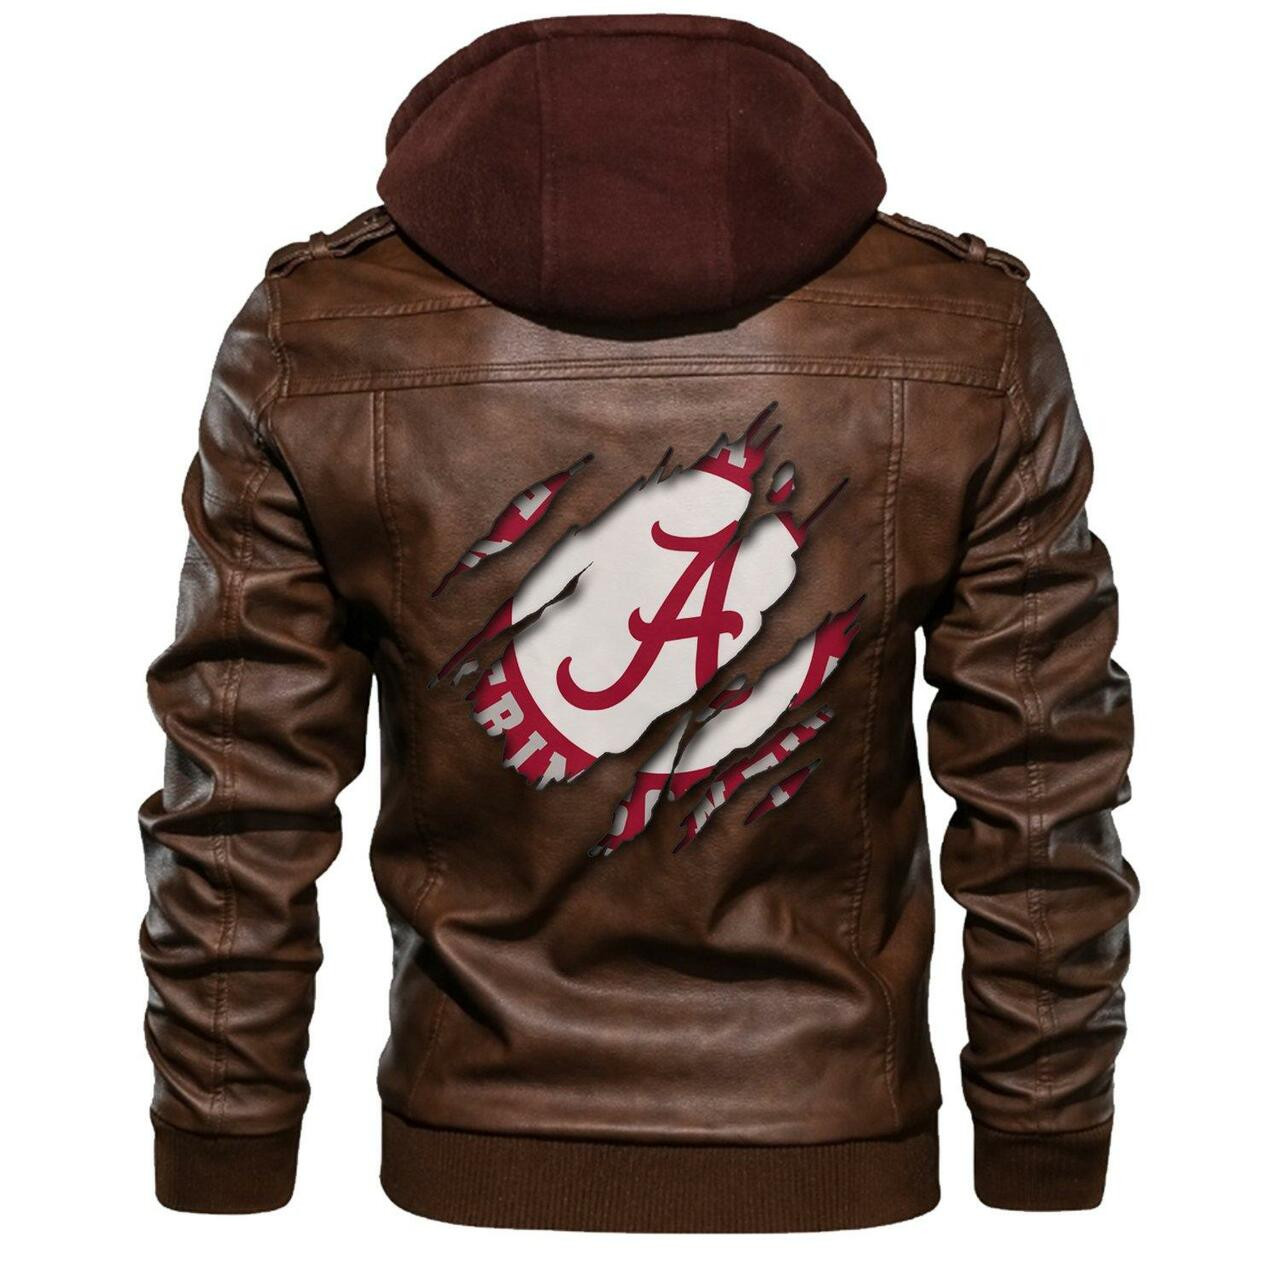 You can find Leather Jacket online at a great price 20